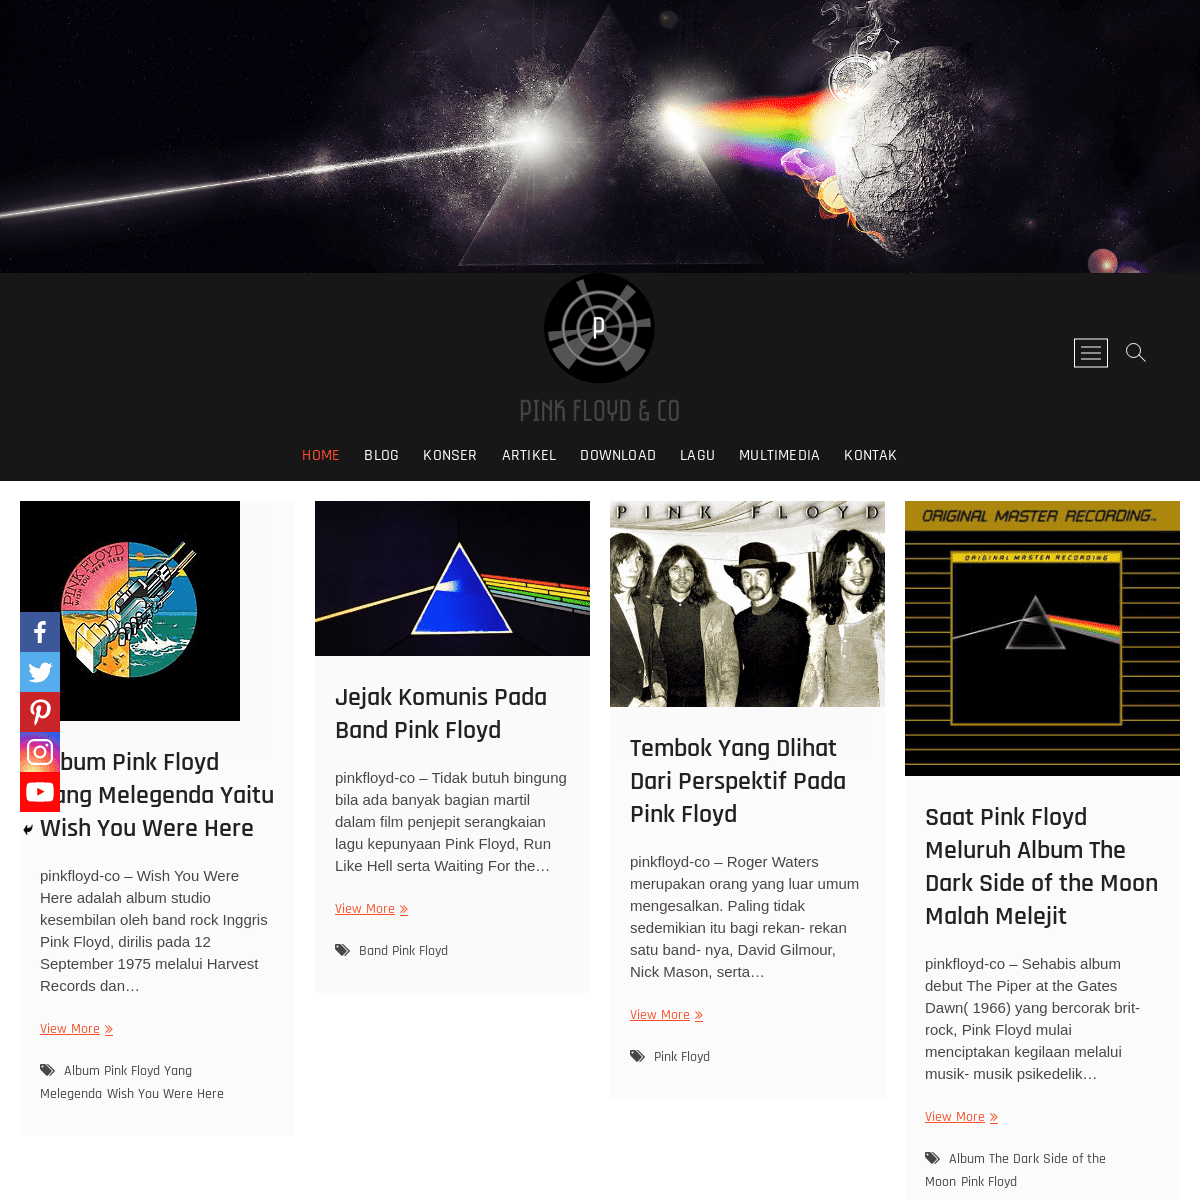 A complete backup of https://pinkfloyd-co.com